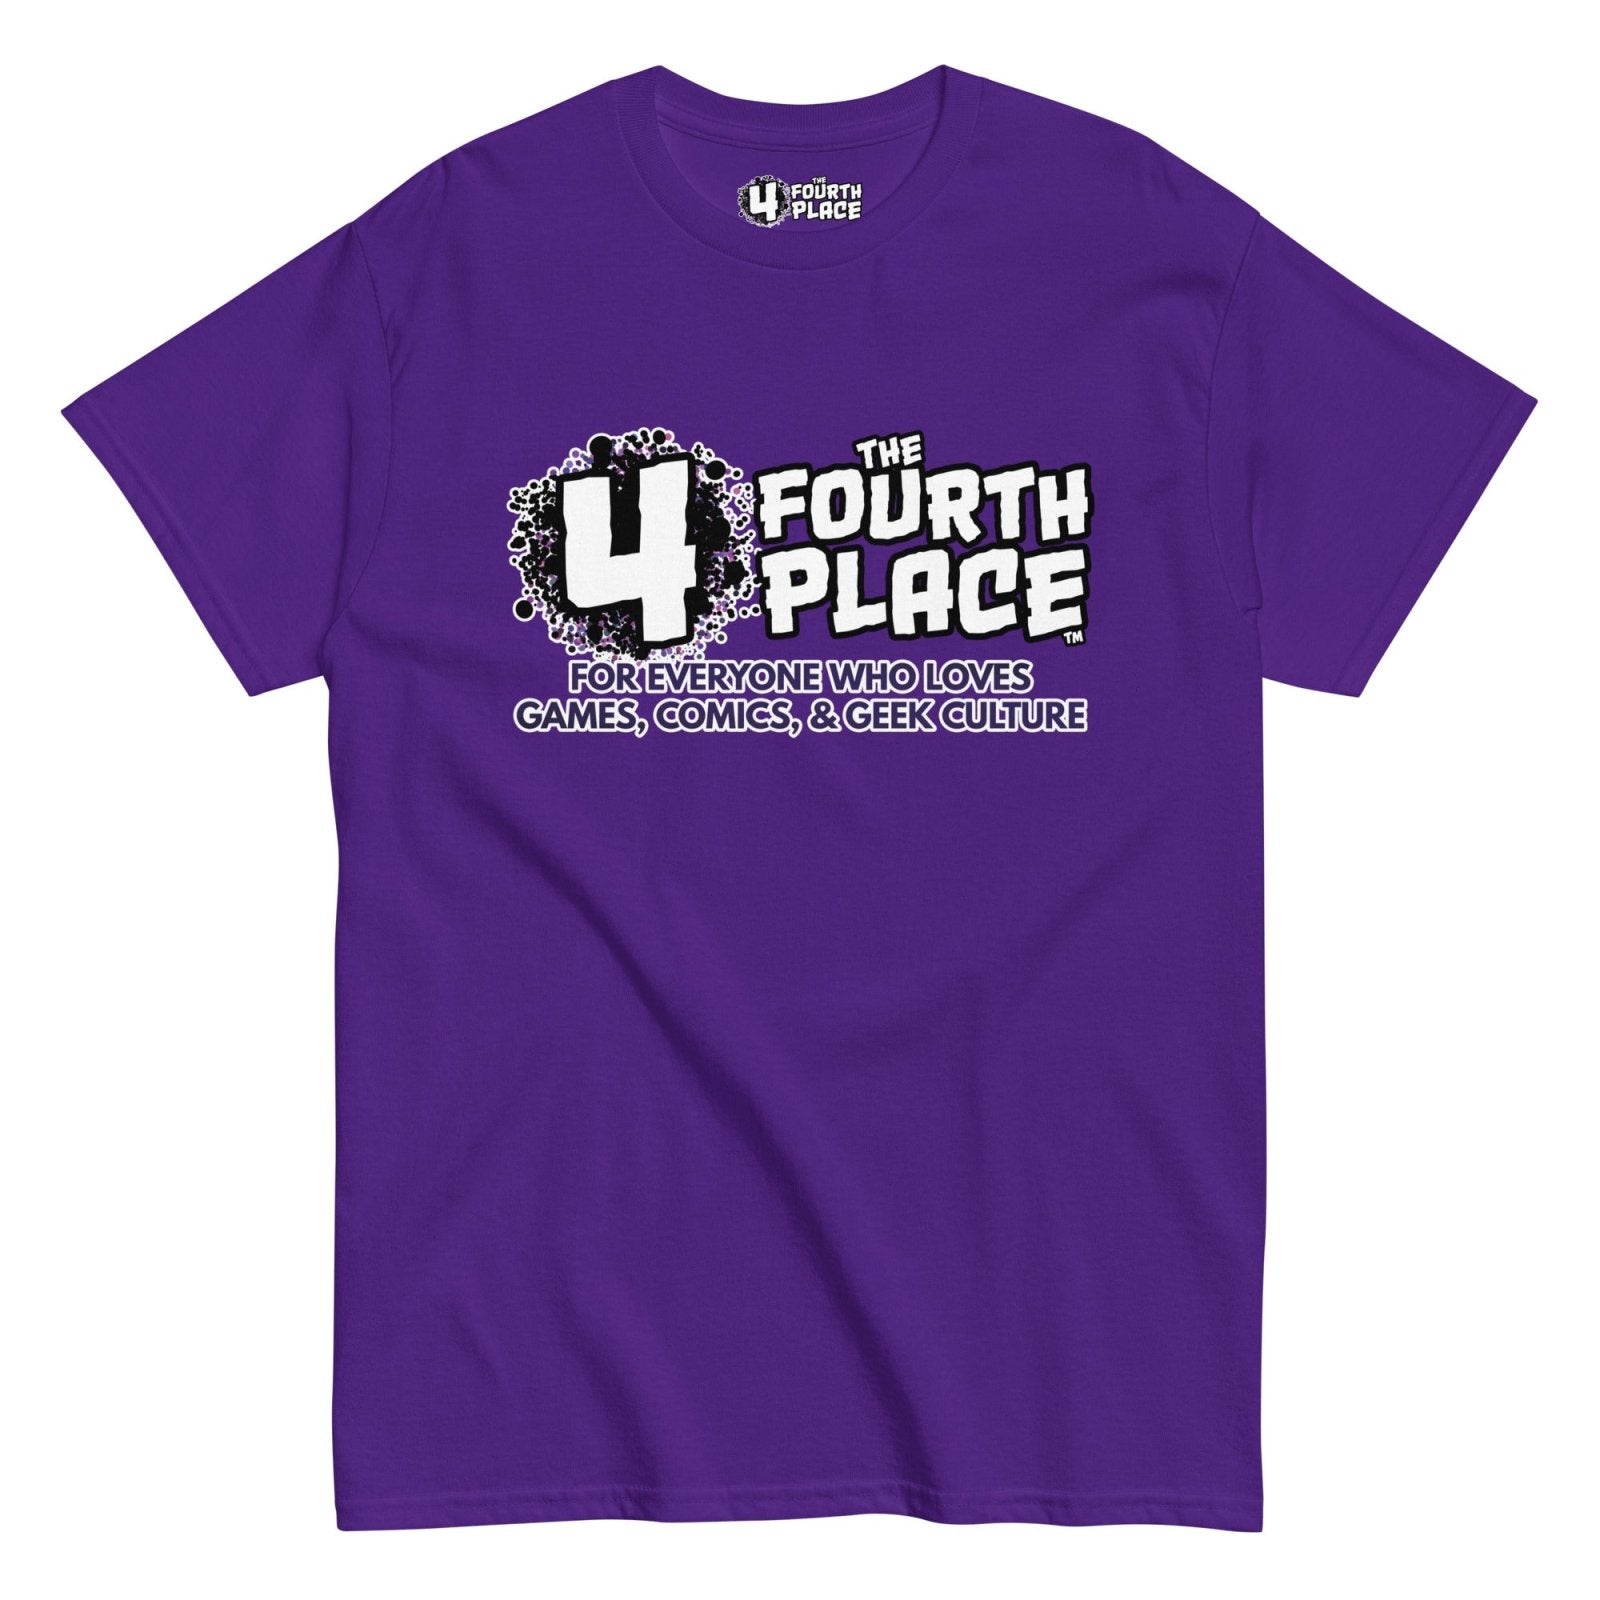 The Purple Shirt (2023) - The Fourth Place